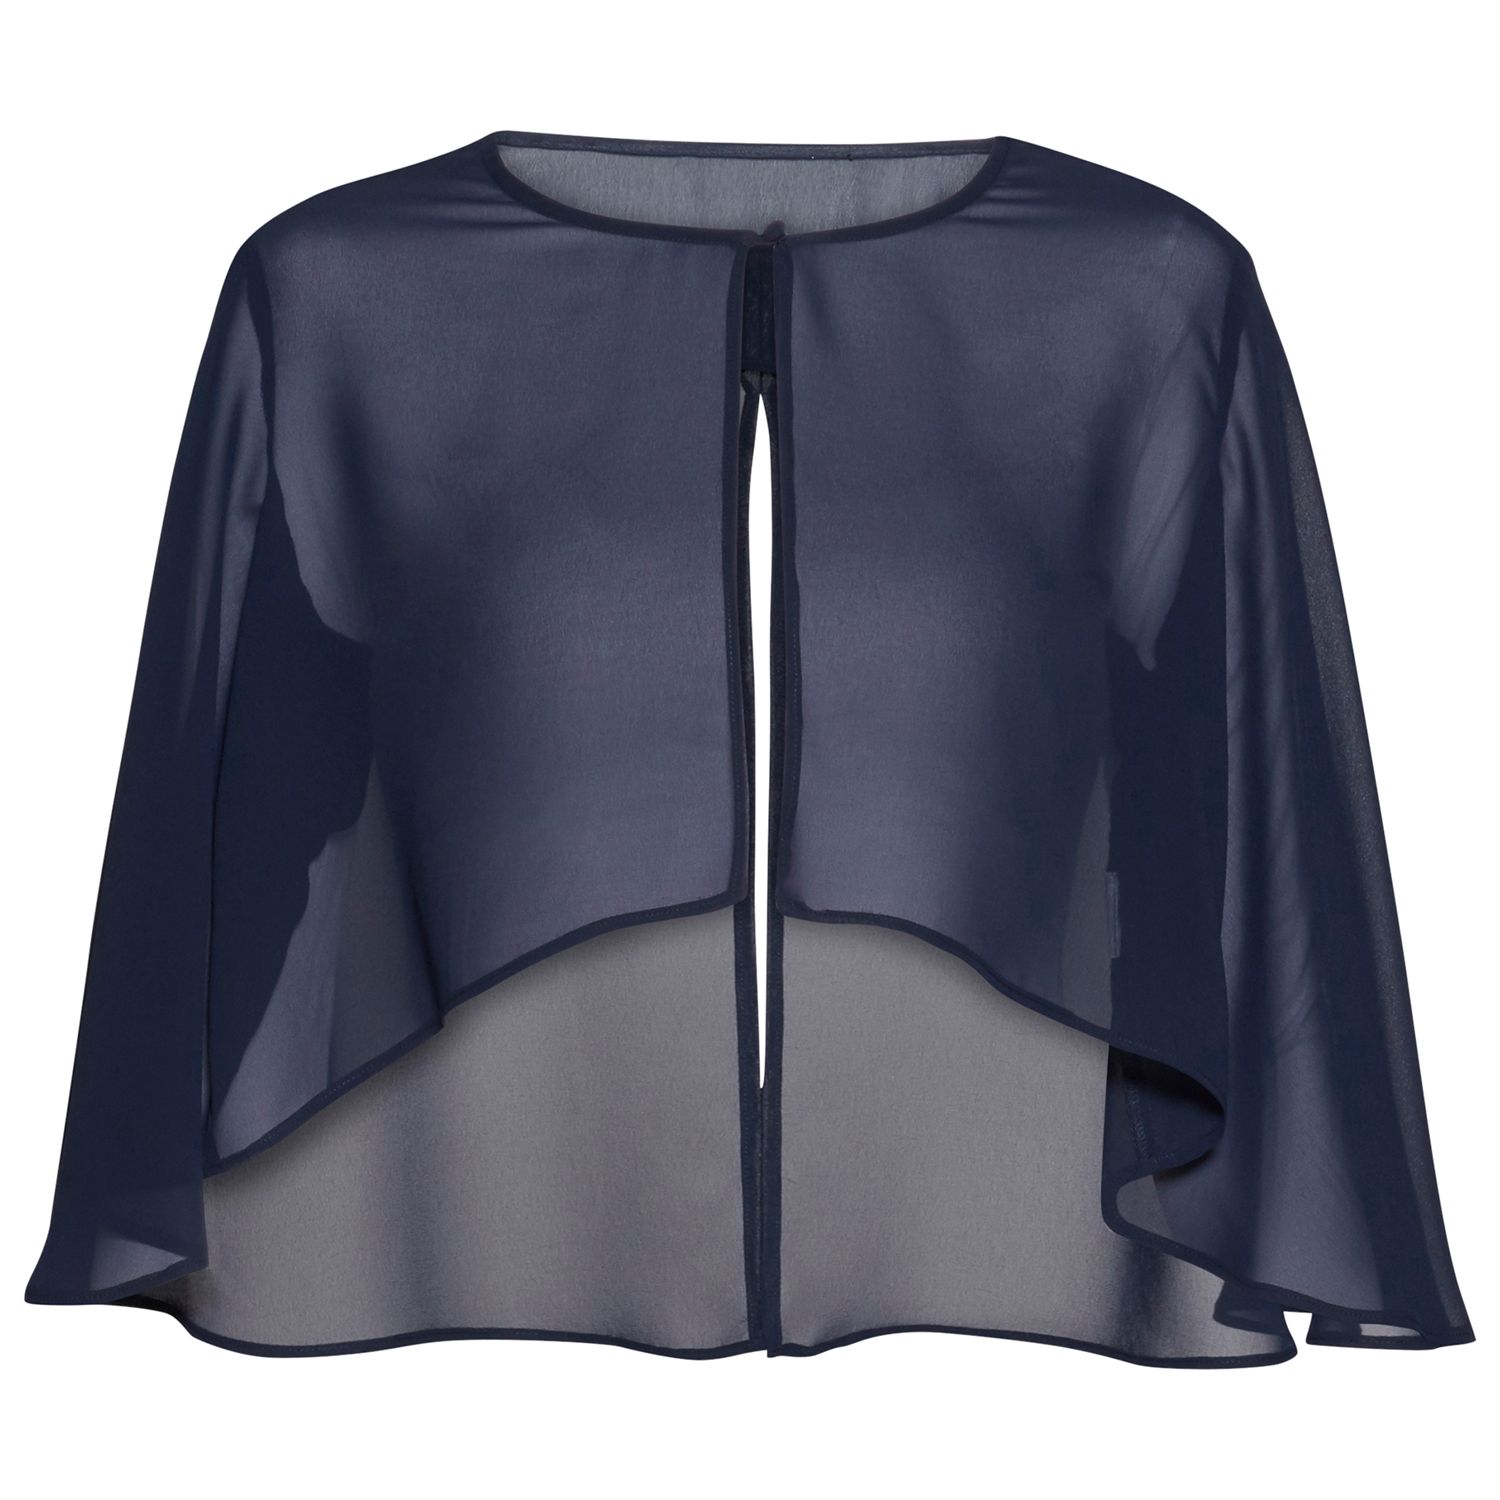 Gina Bacconi Chiffon Cape With Open Back Detail, Spring Navy, 14